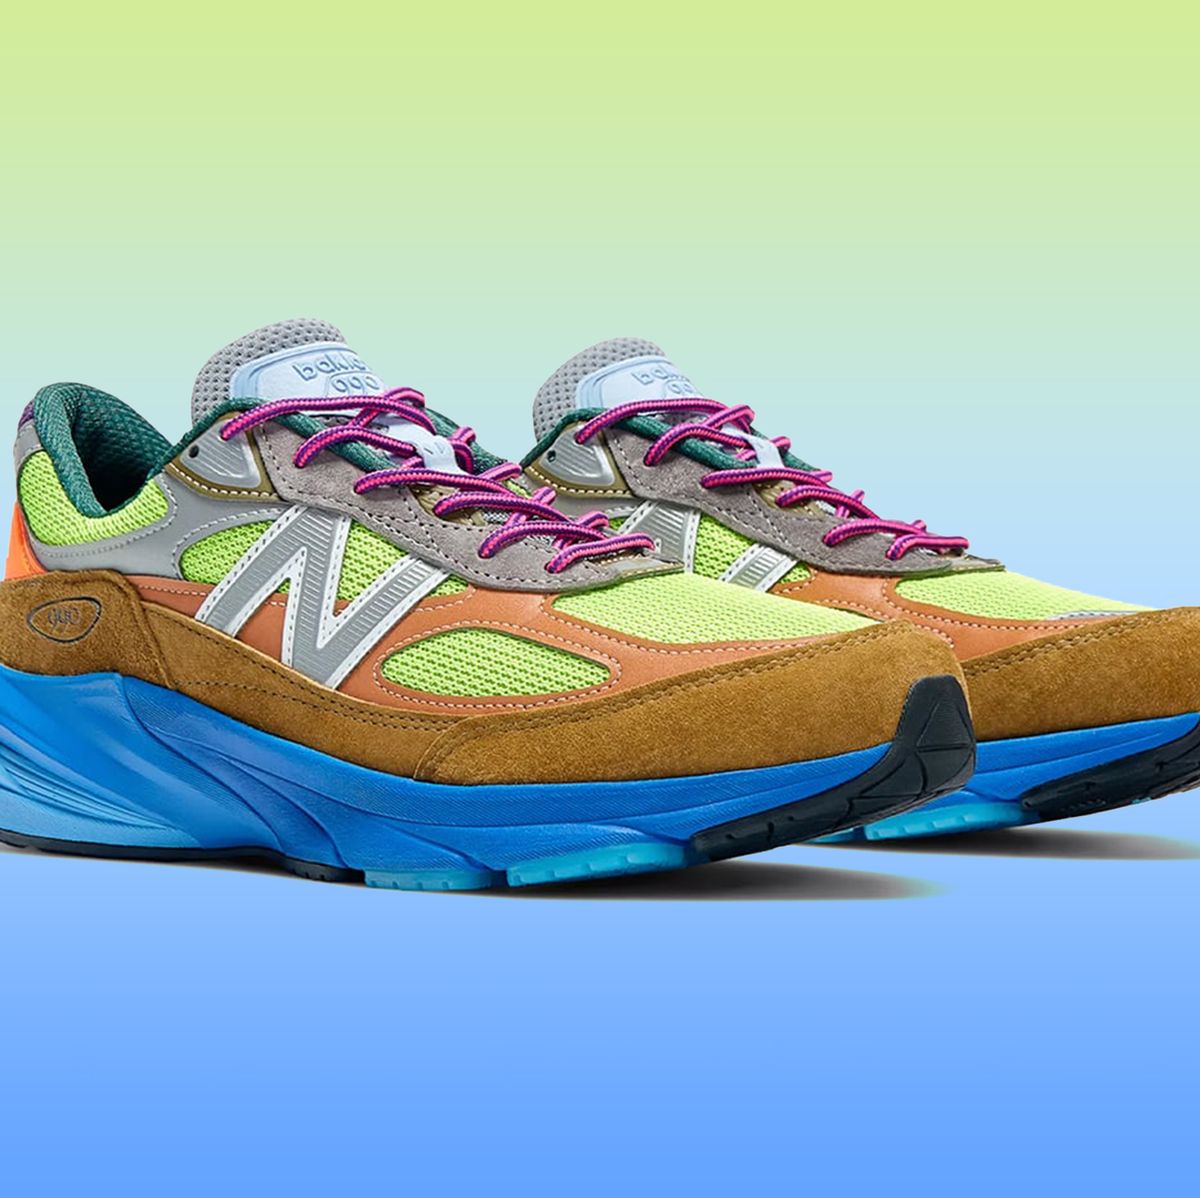 Action Bronson's New Balance Collab: Everything You Need to Know